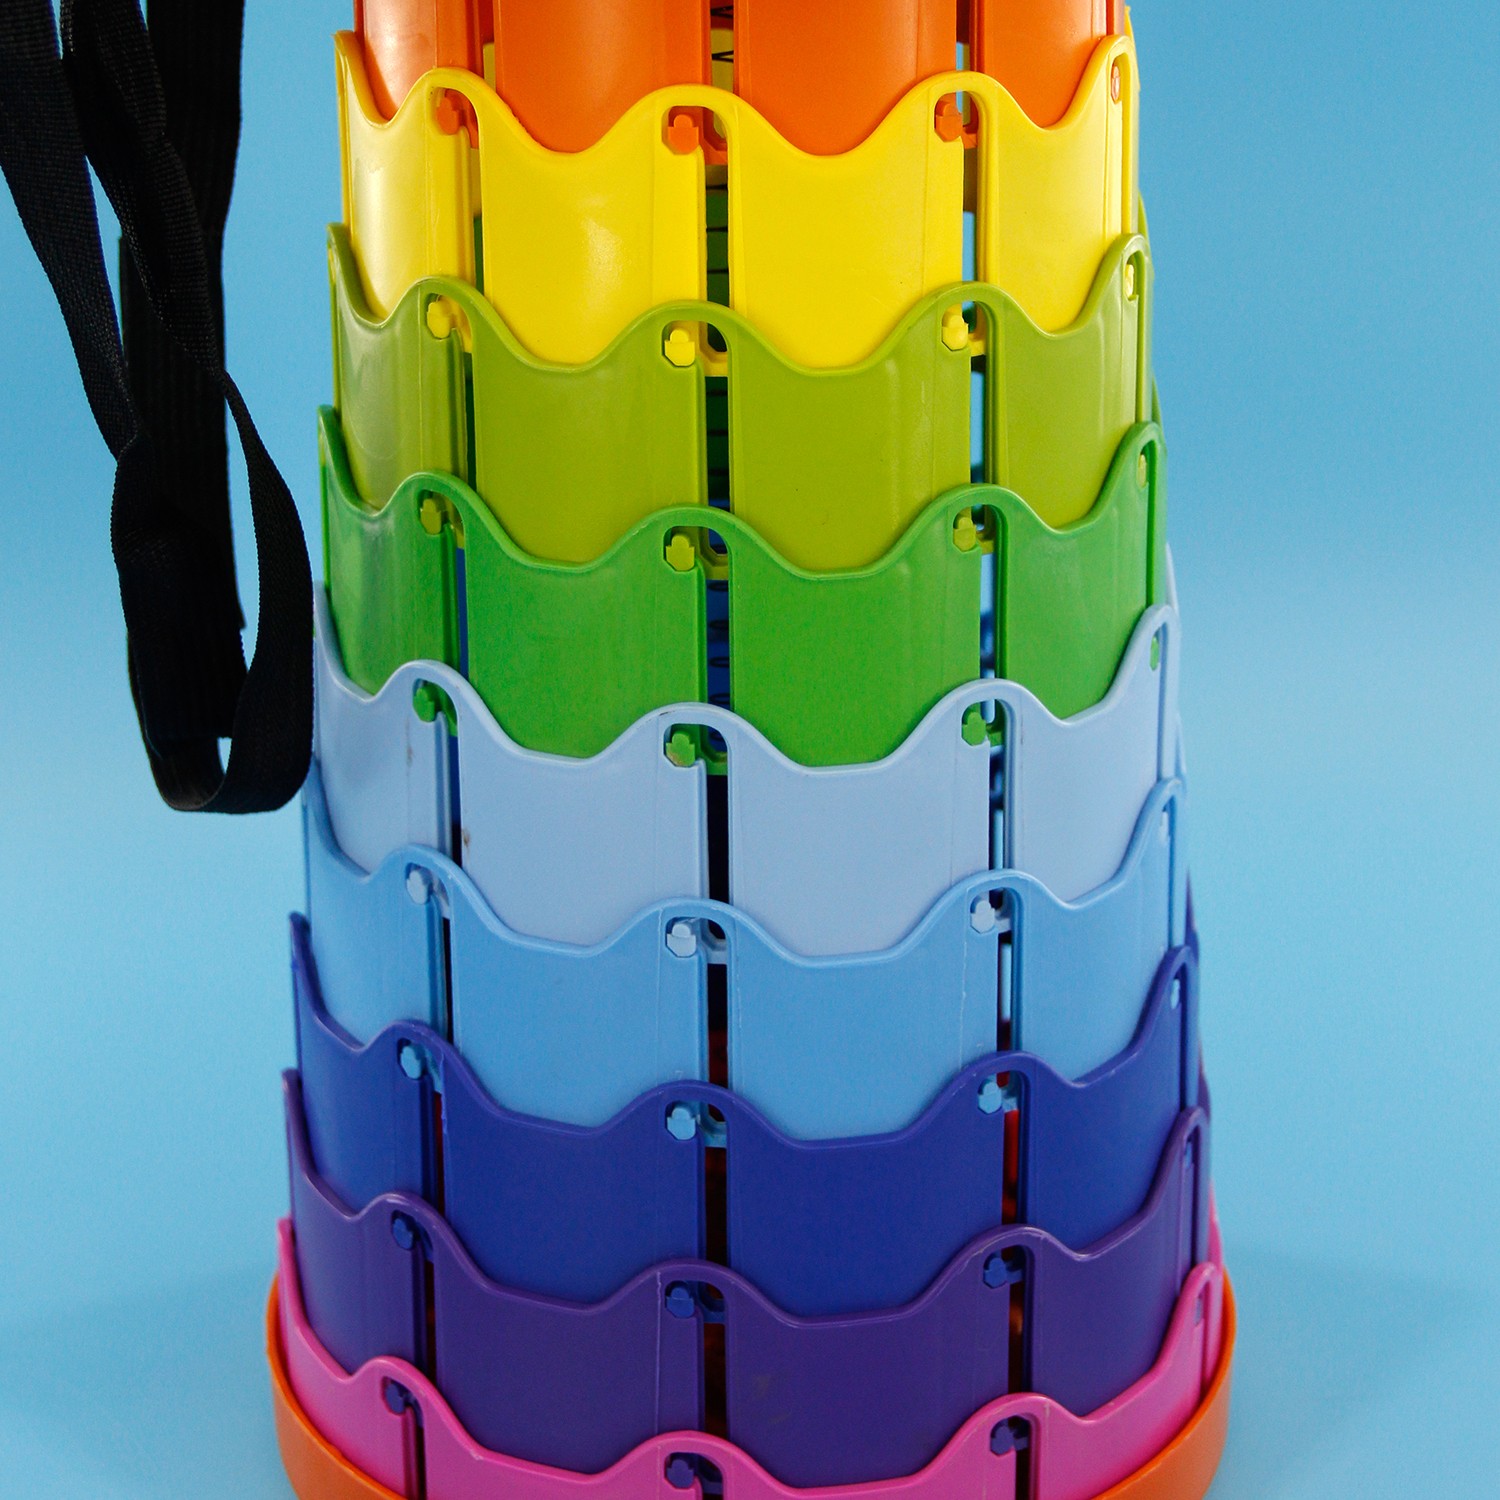 The portable rainbow stool can be directly charged by solar energy, and it also comes with a Bluetooth speaker!